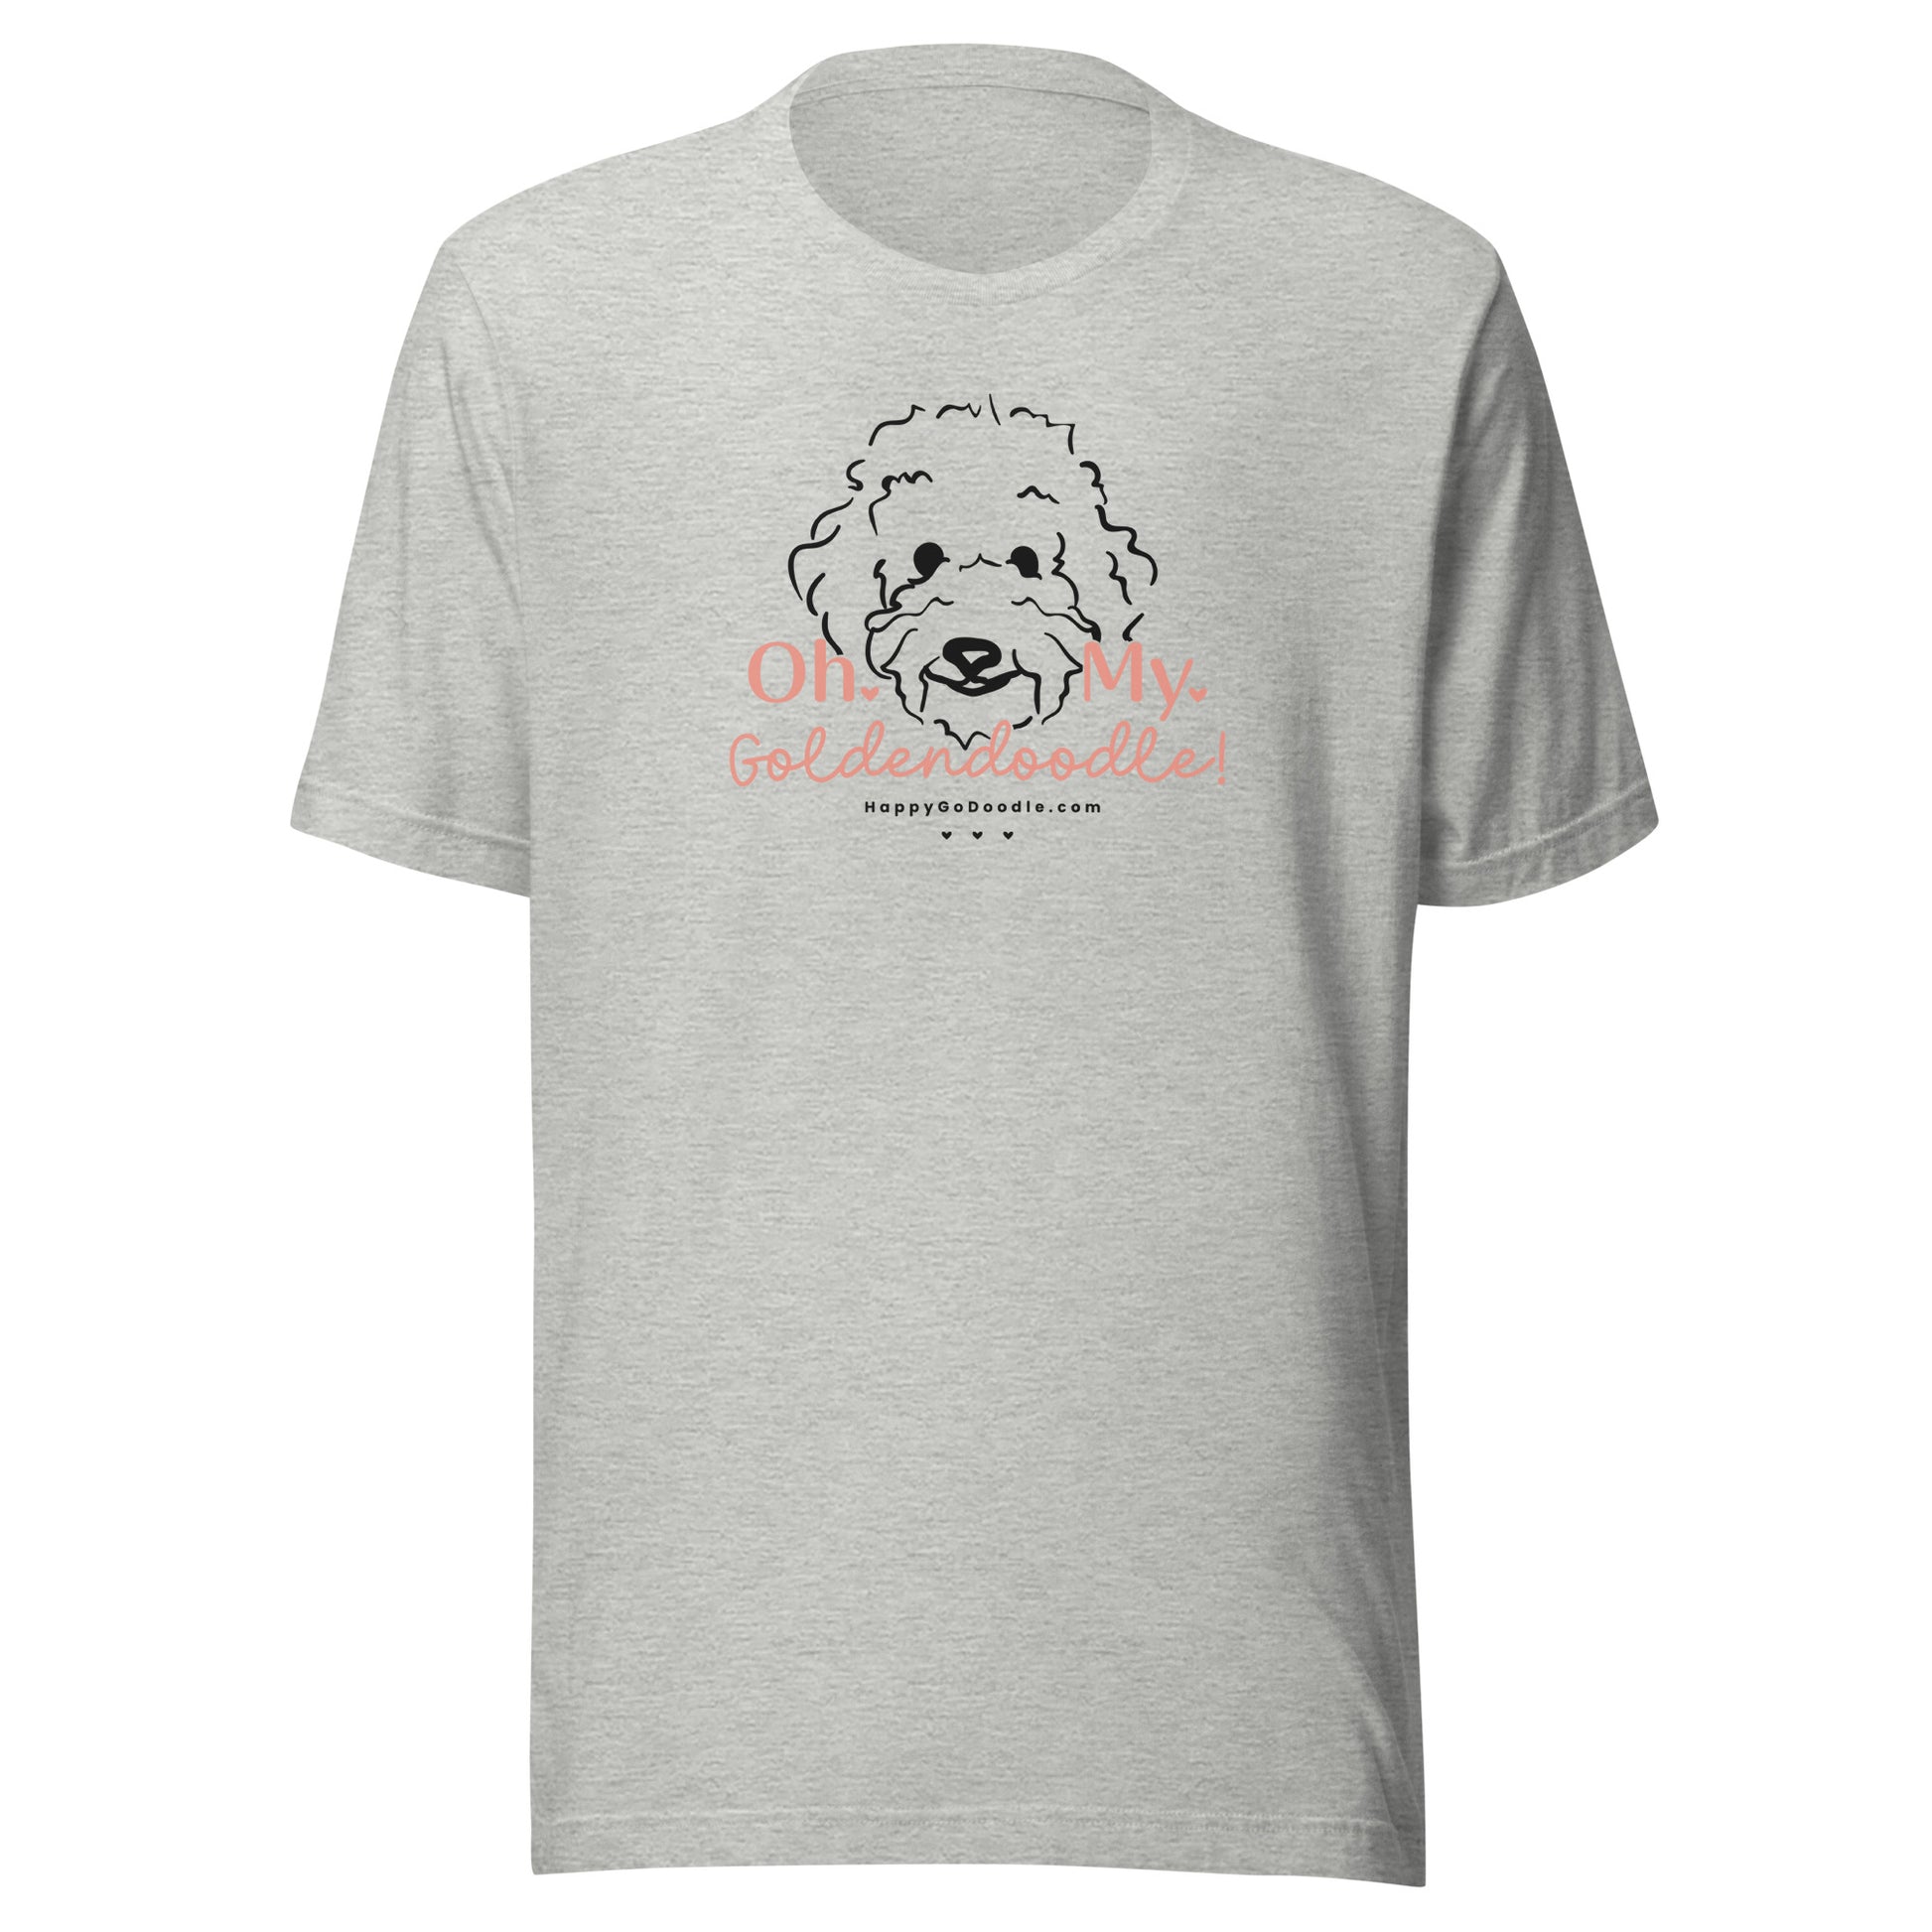 Goldendoodle t-shirt with Goldendoodle dog face and words "Oh My Goldendoodle" in athletic heather color